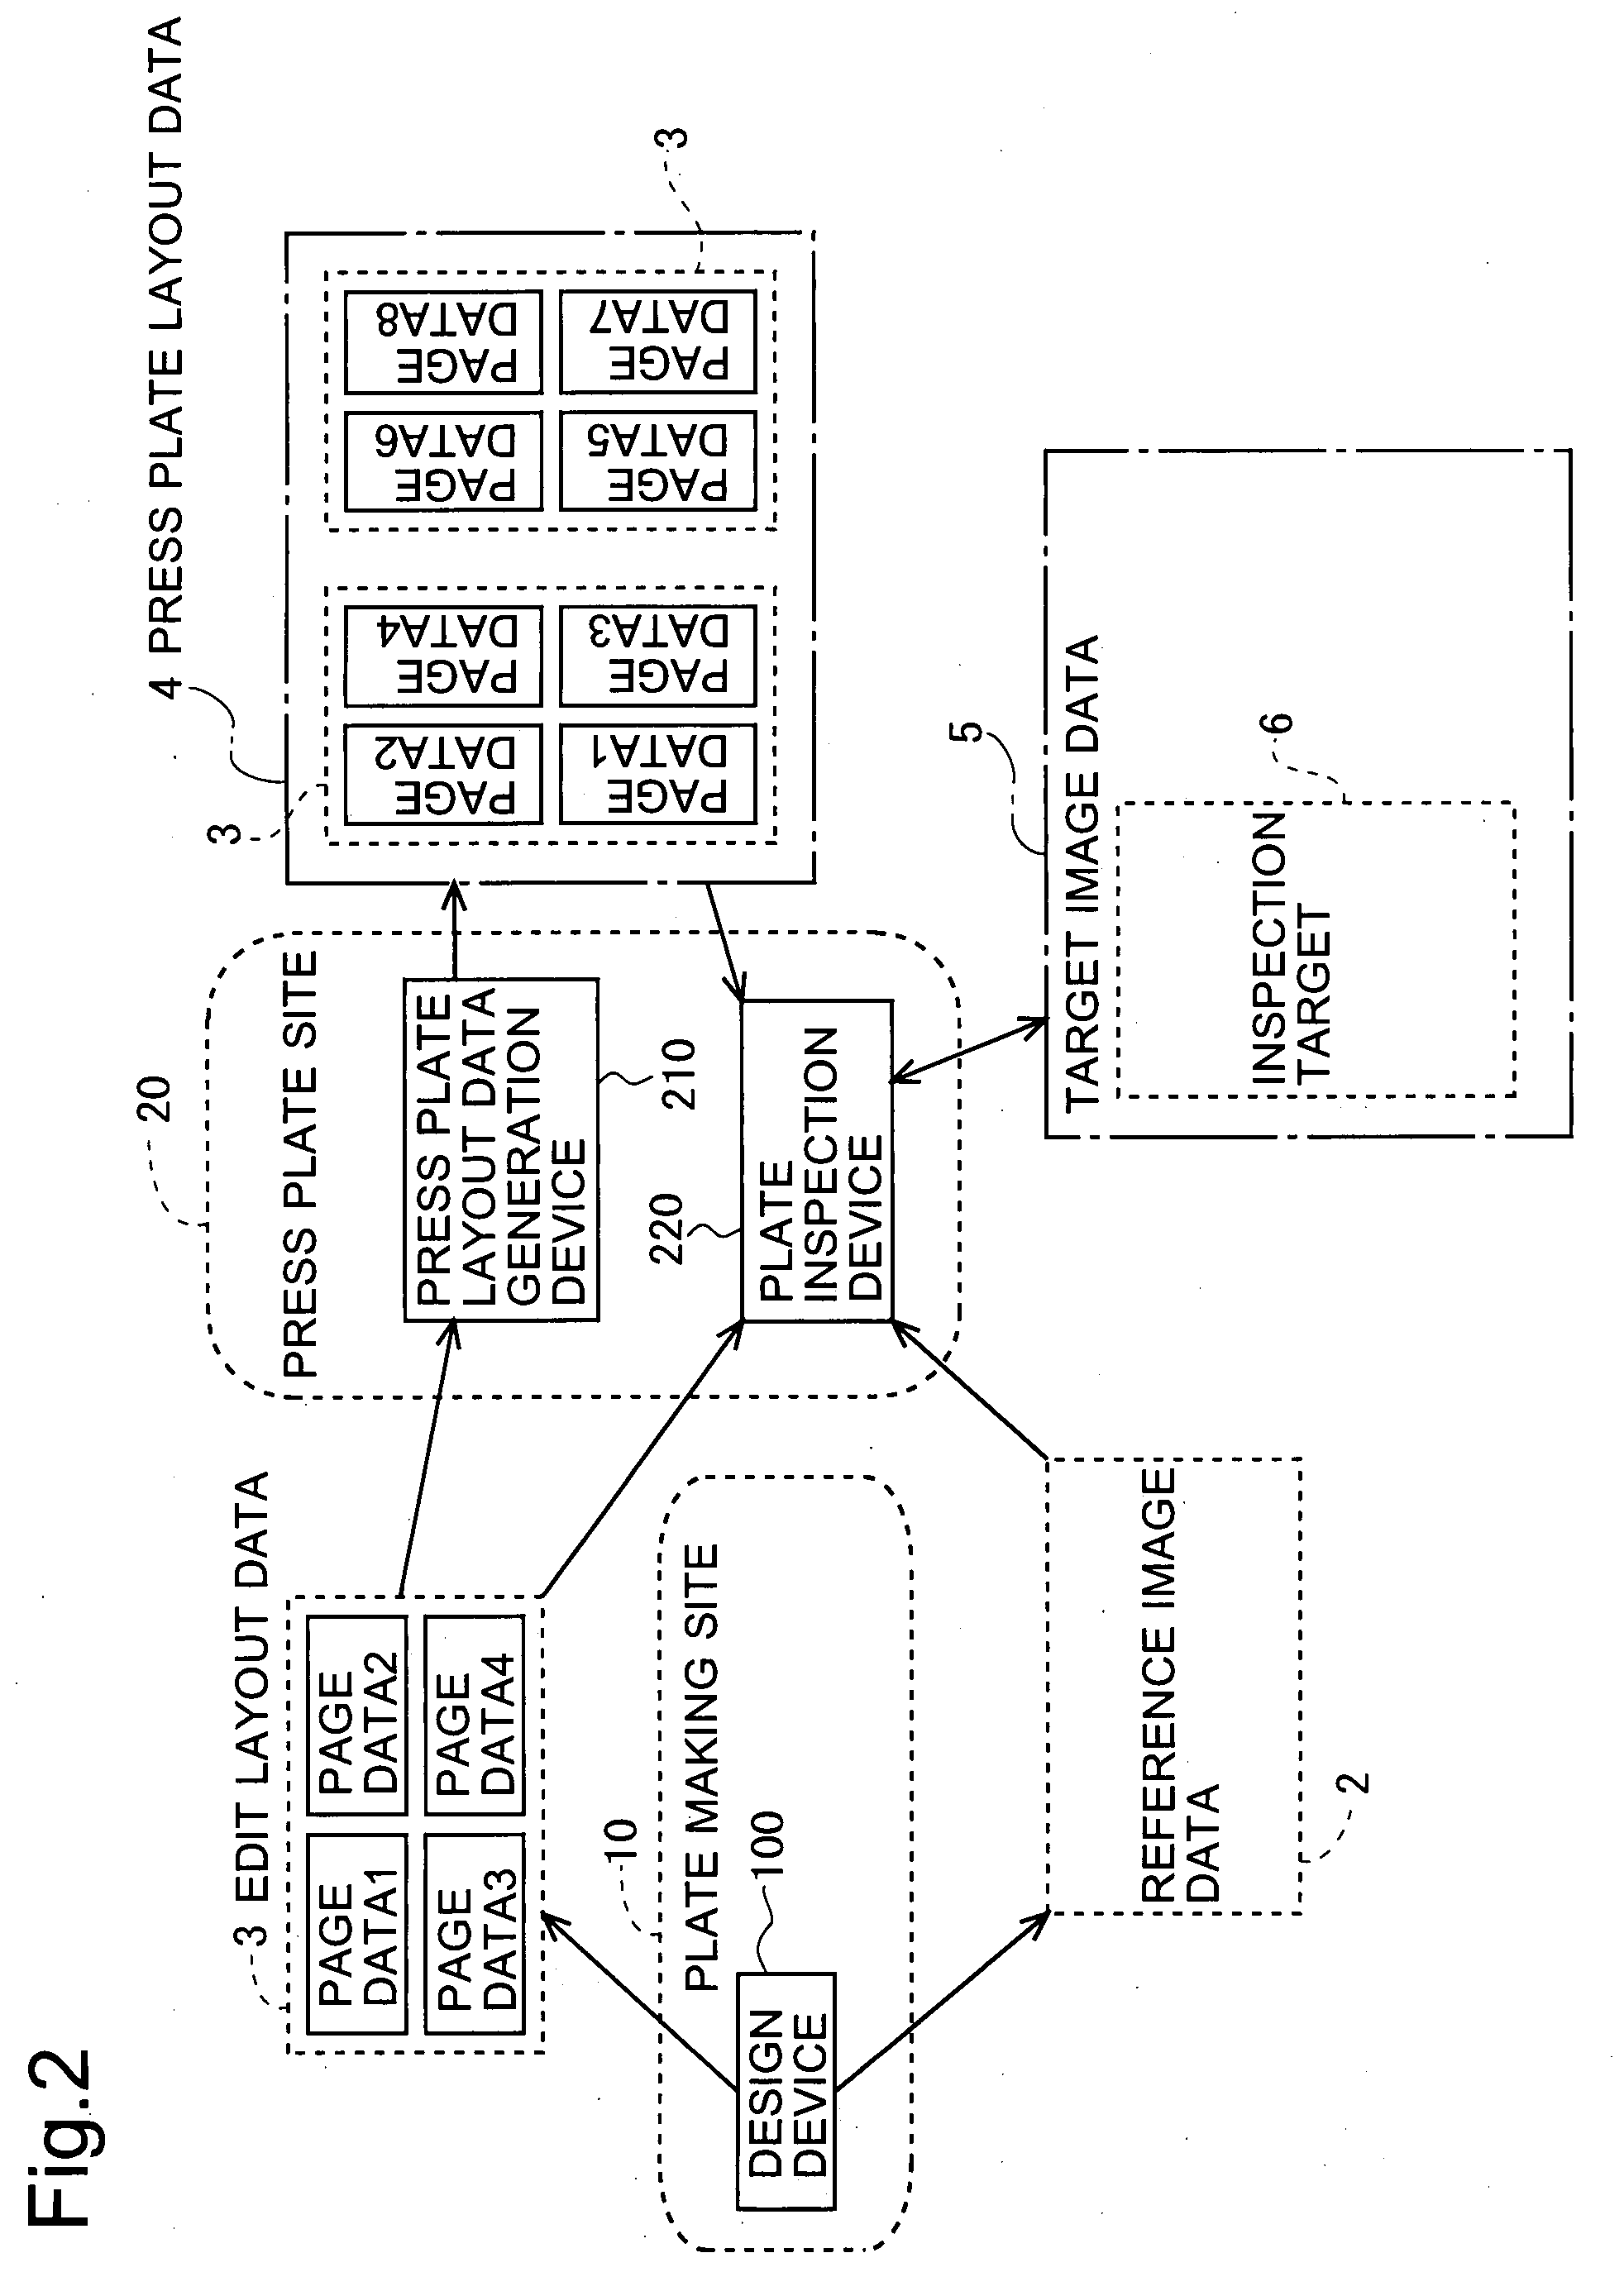 Plate making/printing system and plate inspection method for use in same